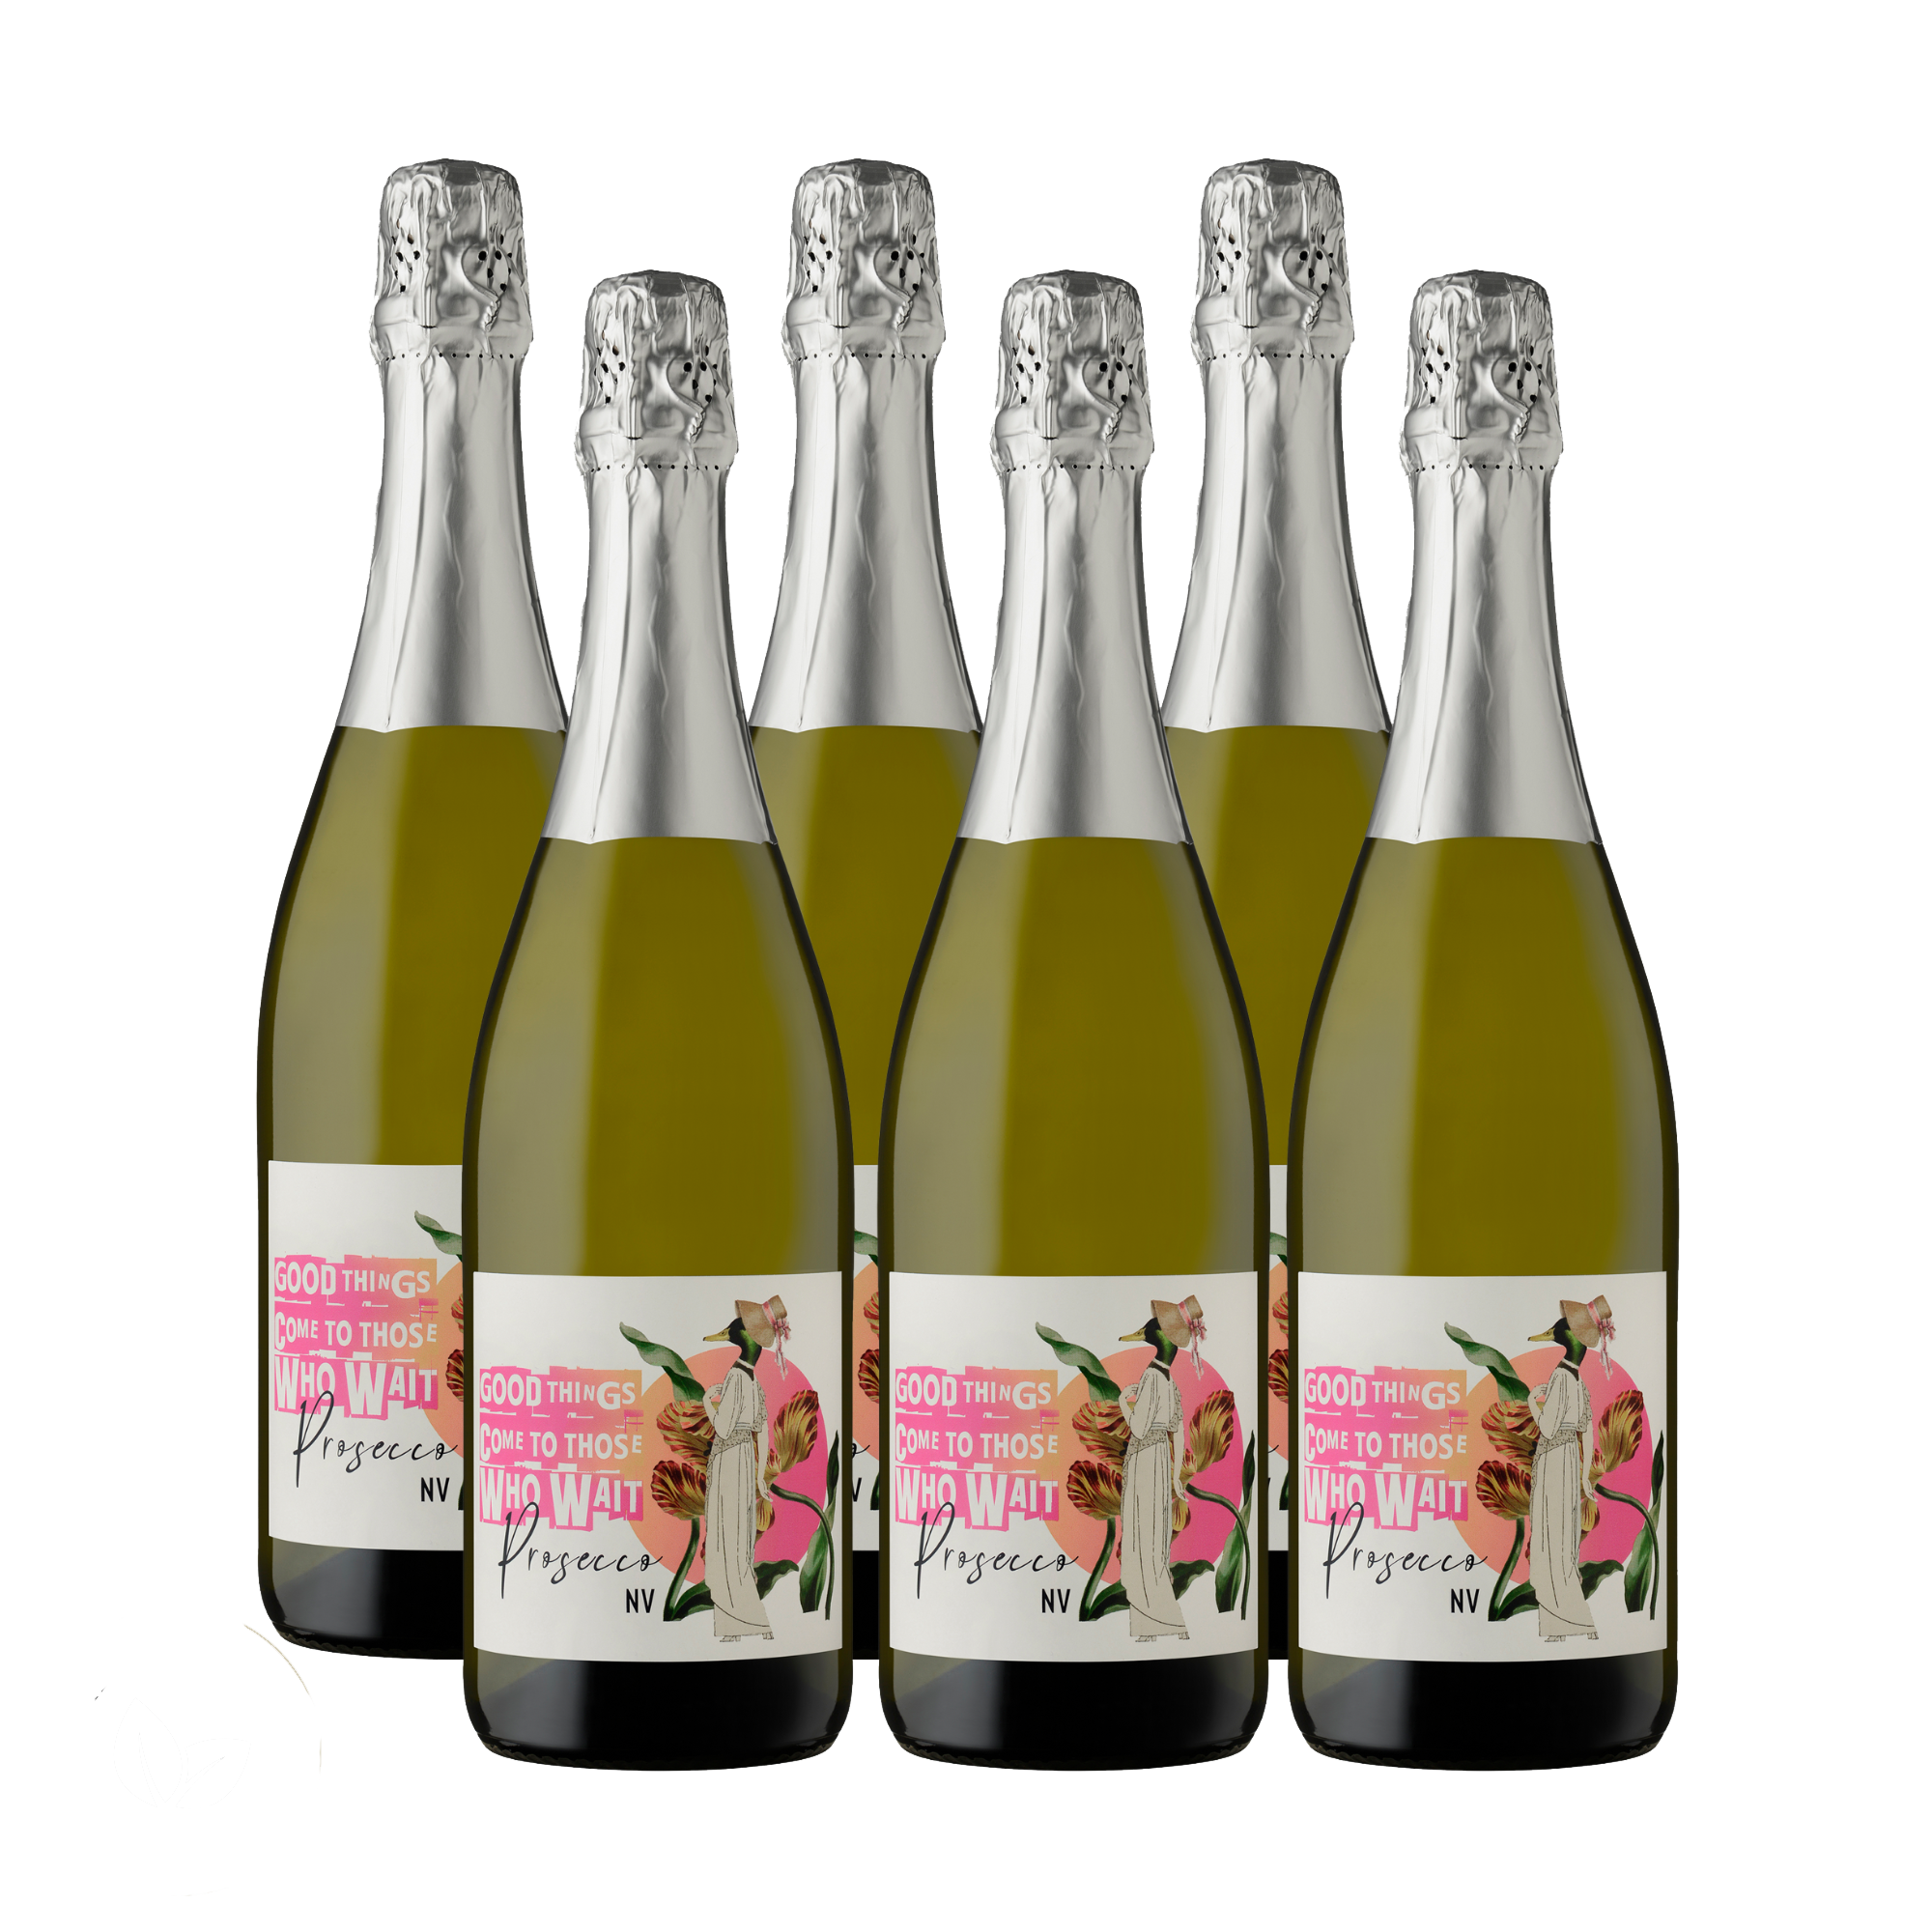 Good Things Come To Those Who Wait Prosecco NV 6PK